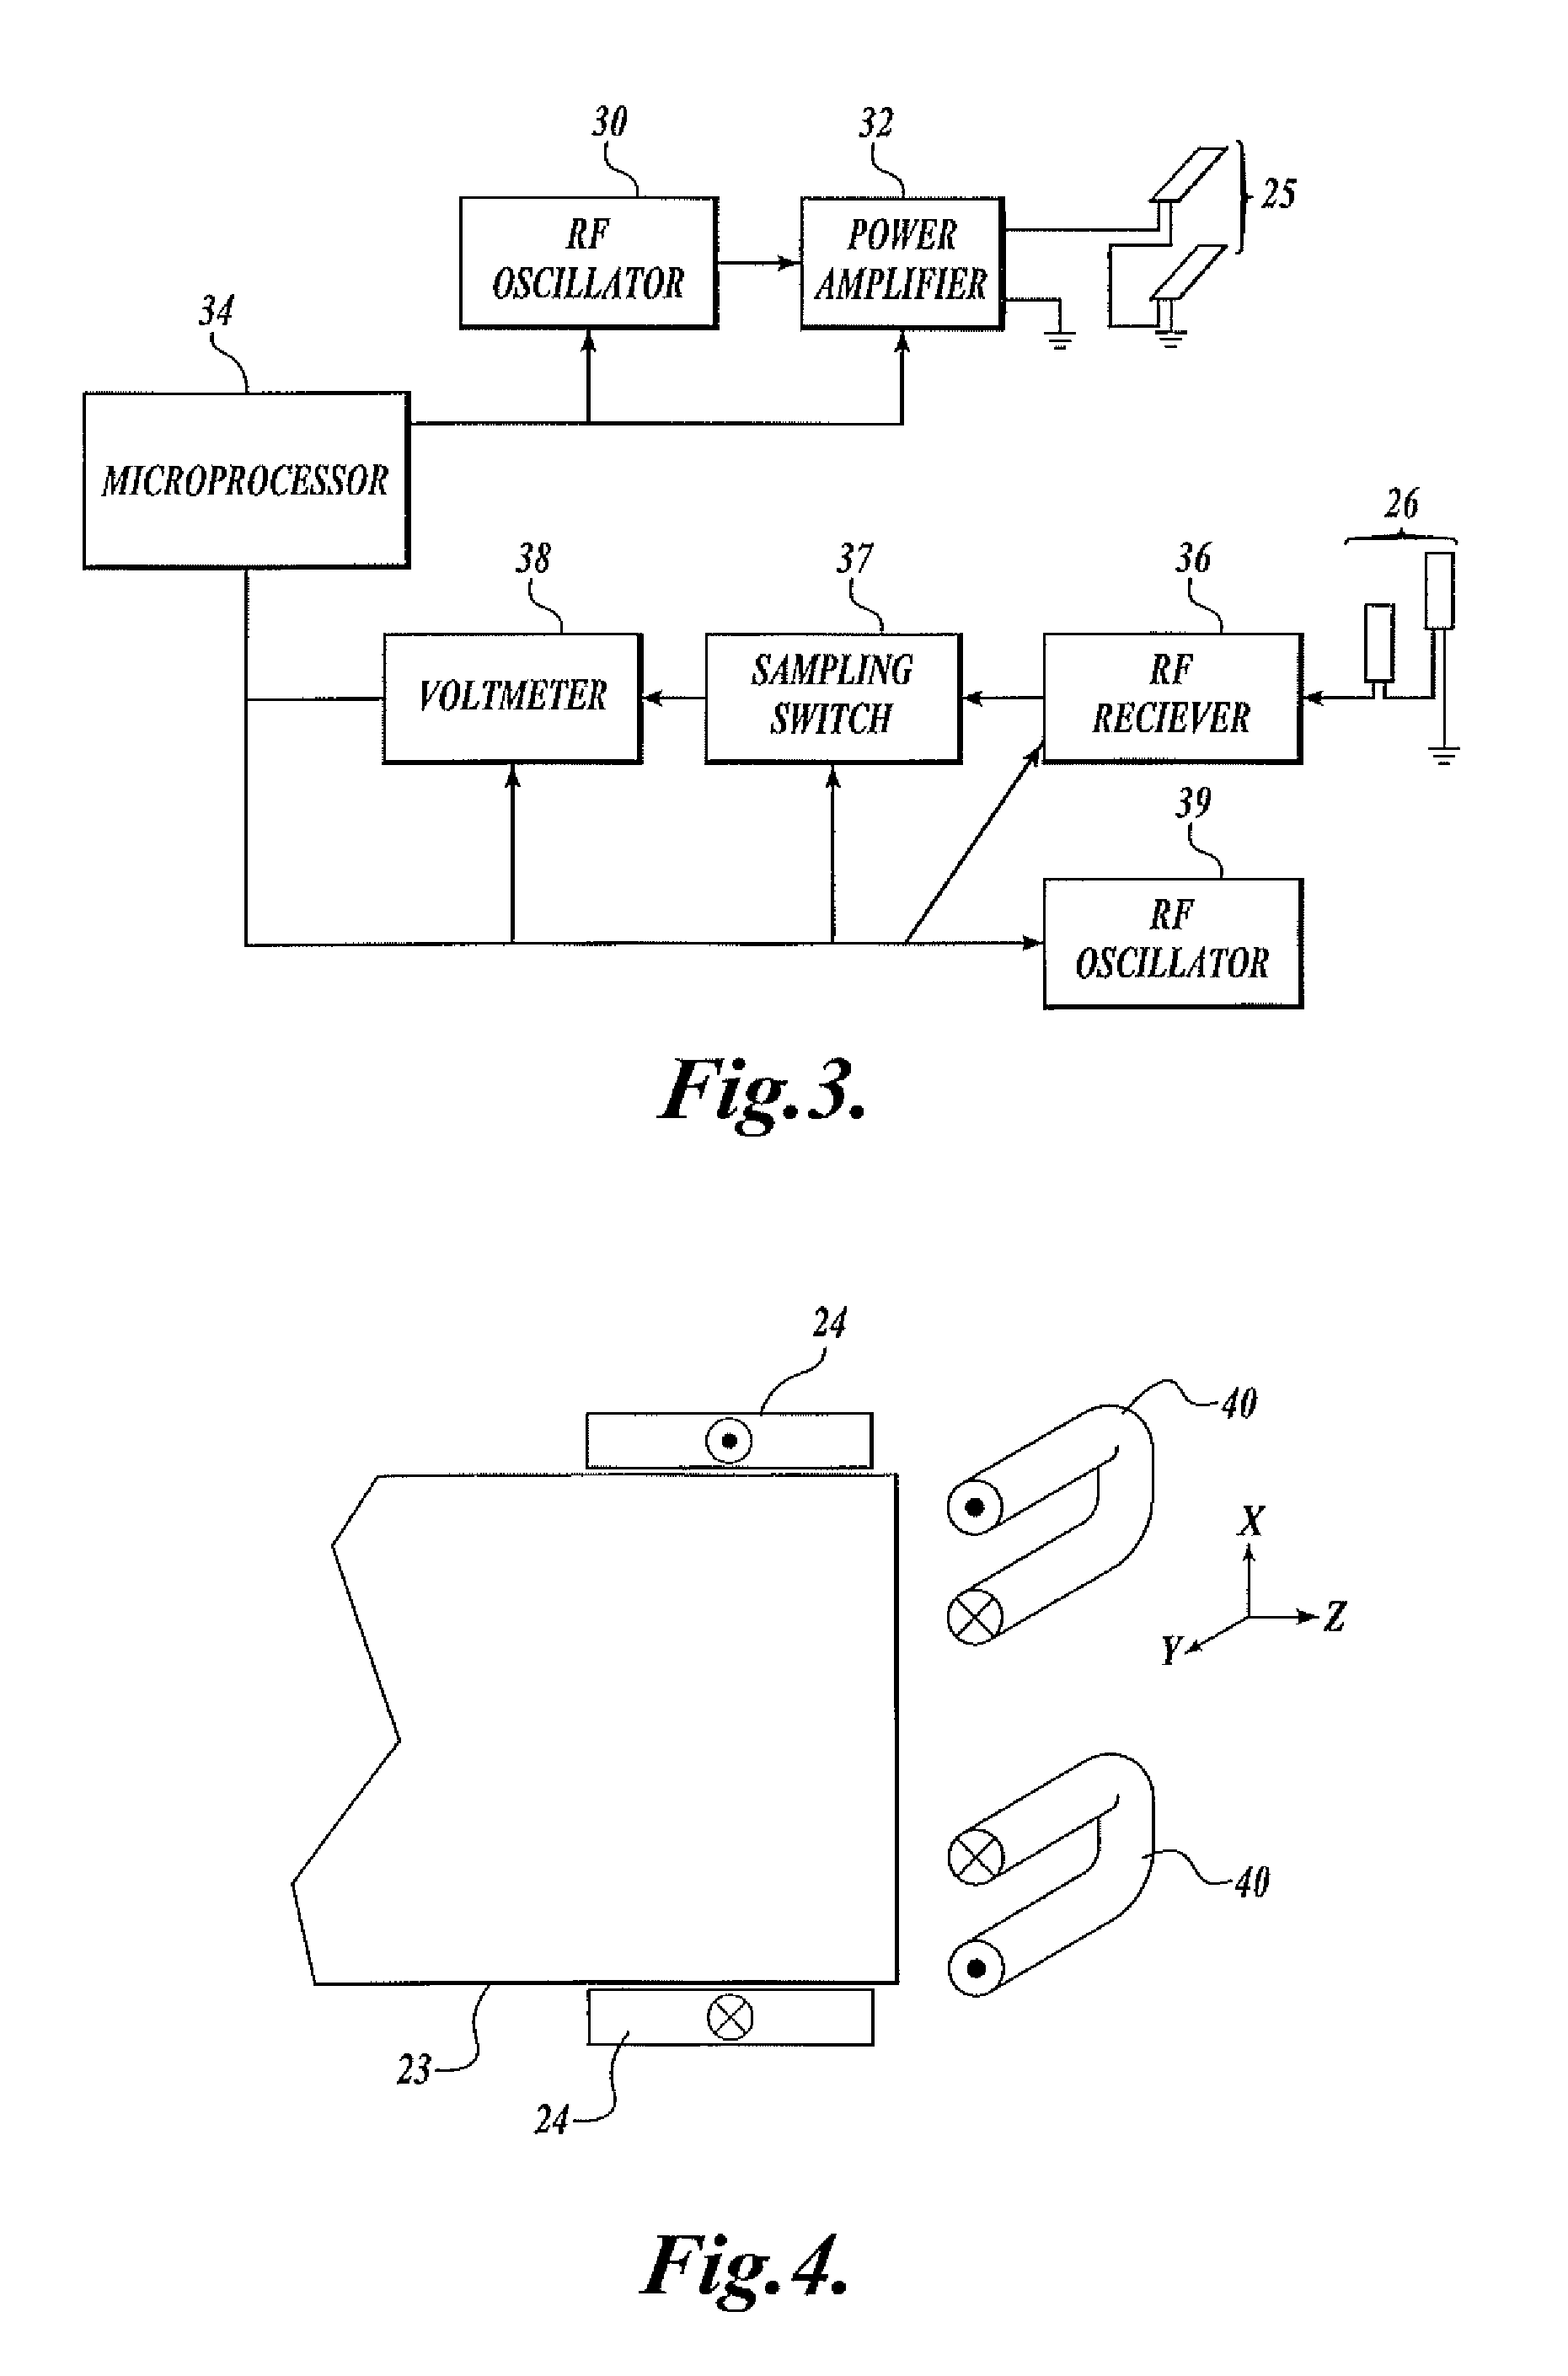 Method and system for producing and reading labels based on magnetic resonance techniques